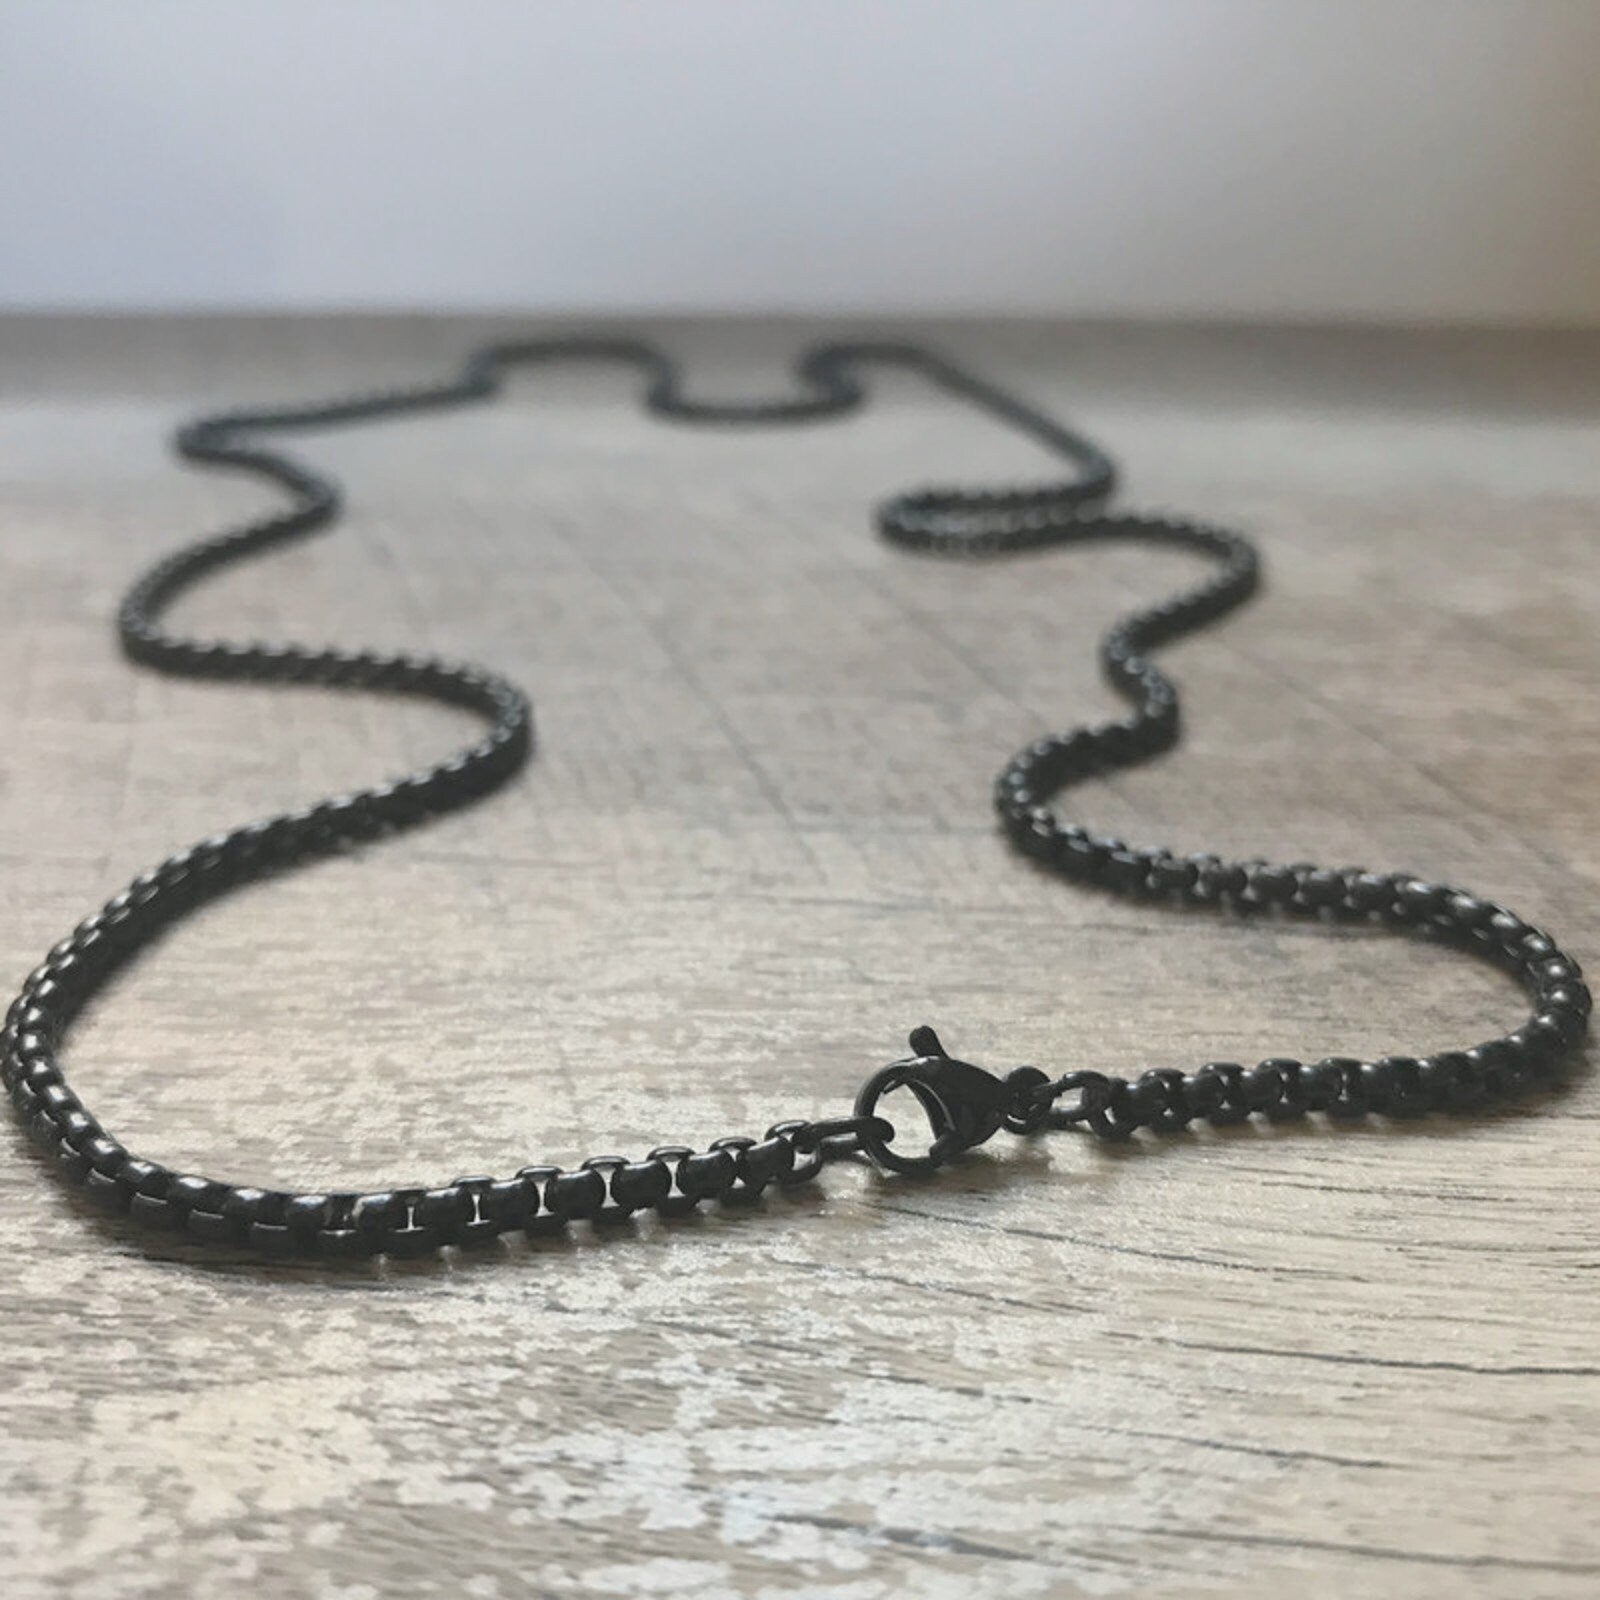 Box Link Necklace Chain (3mm) - Black, 20